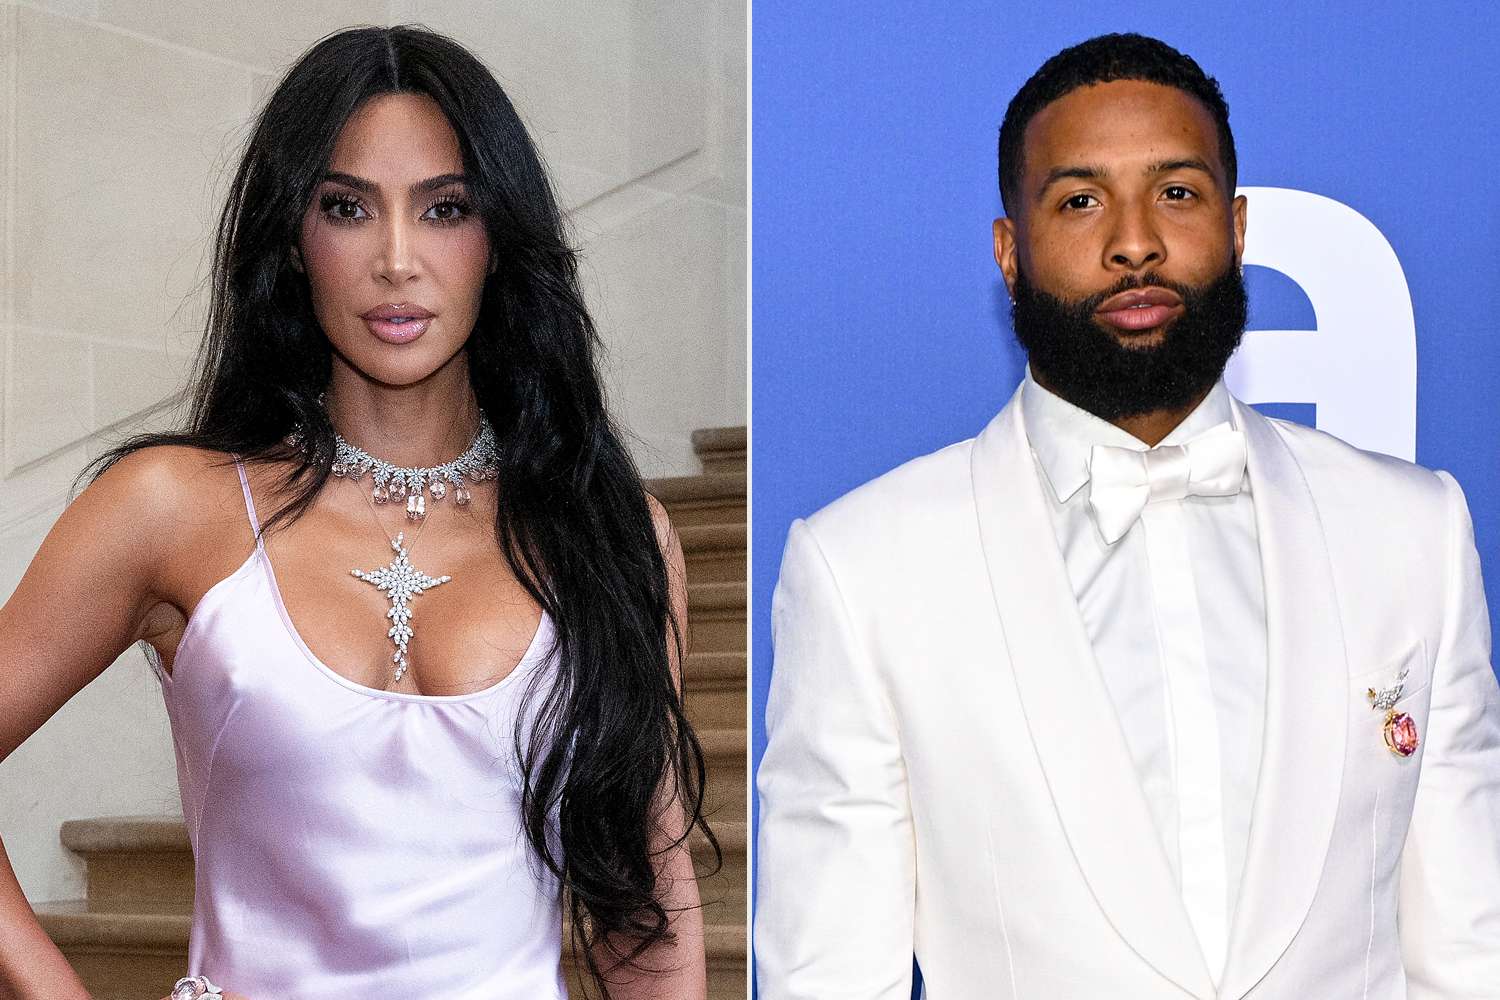 Kim Kardashian And Odell Beckham Jr. Spotted Hugging At Fanatics Party In Vegas